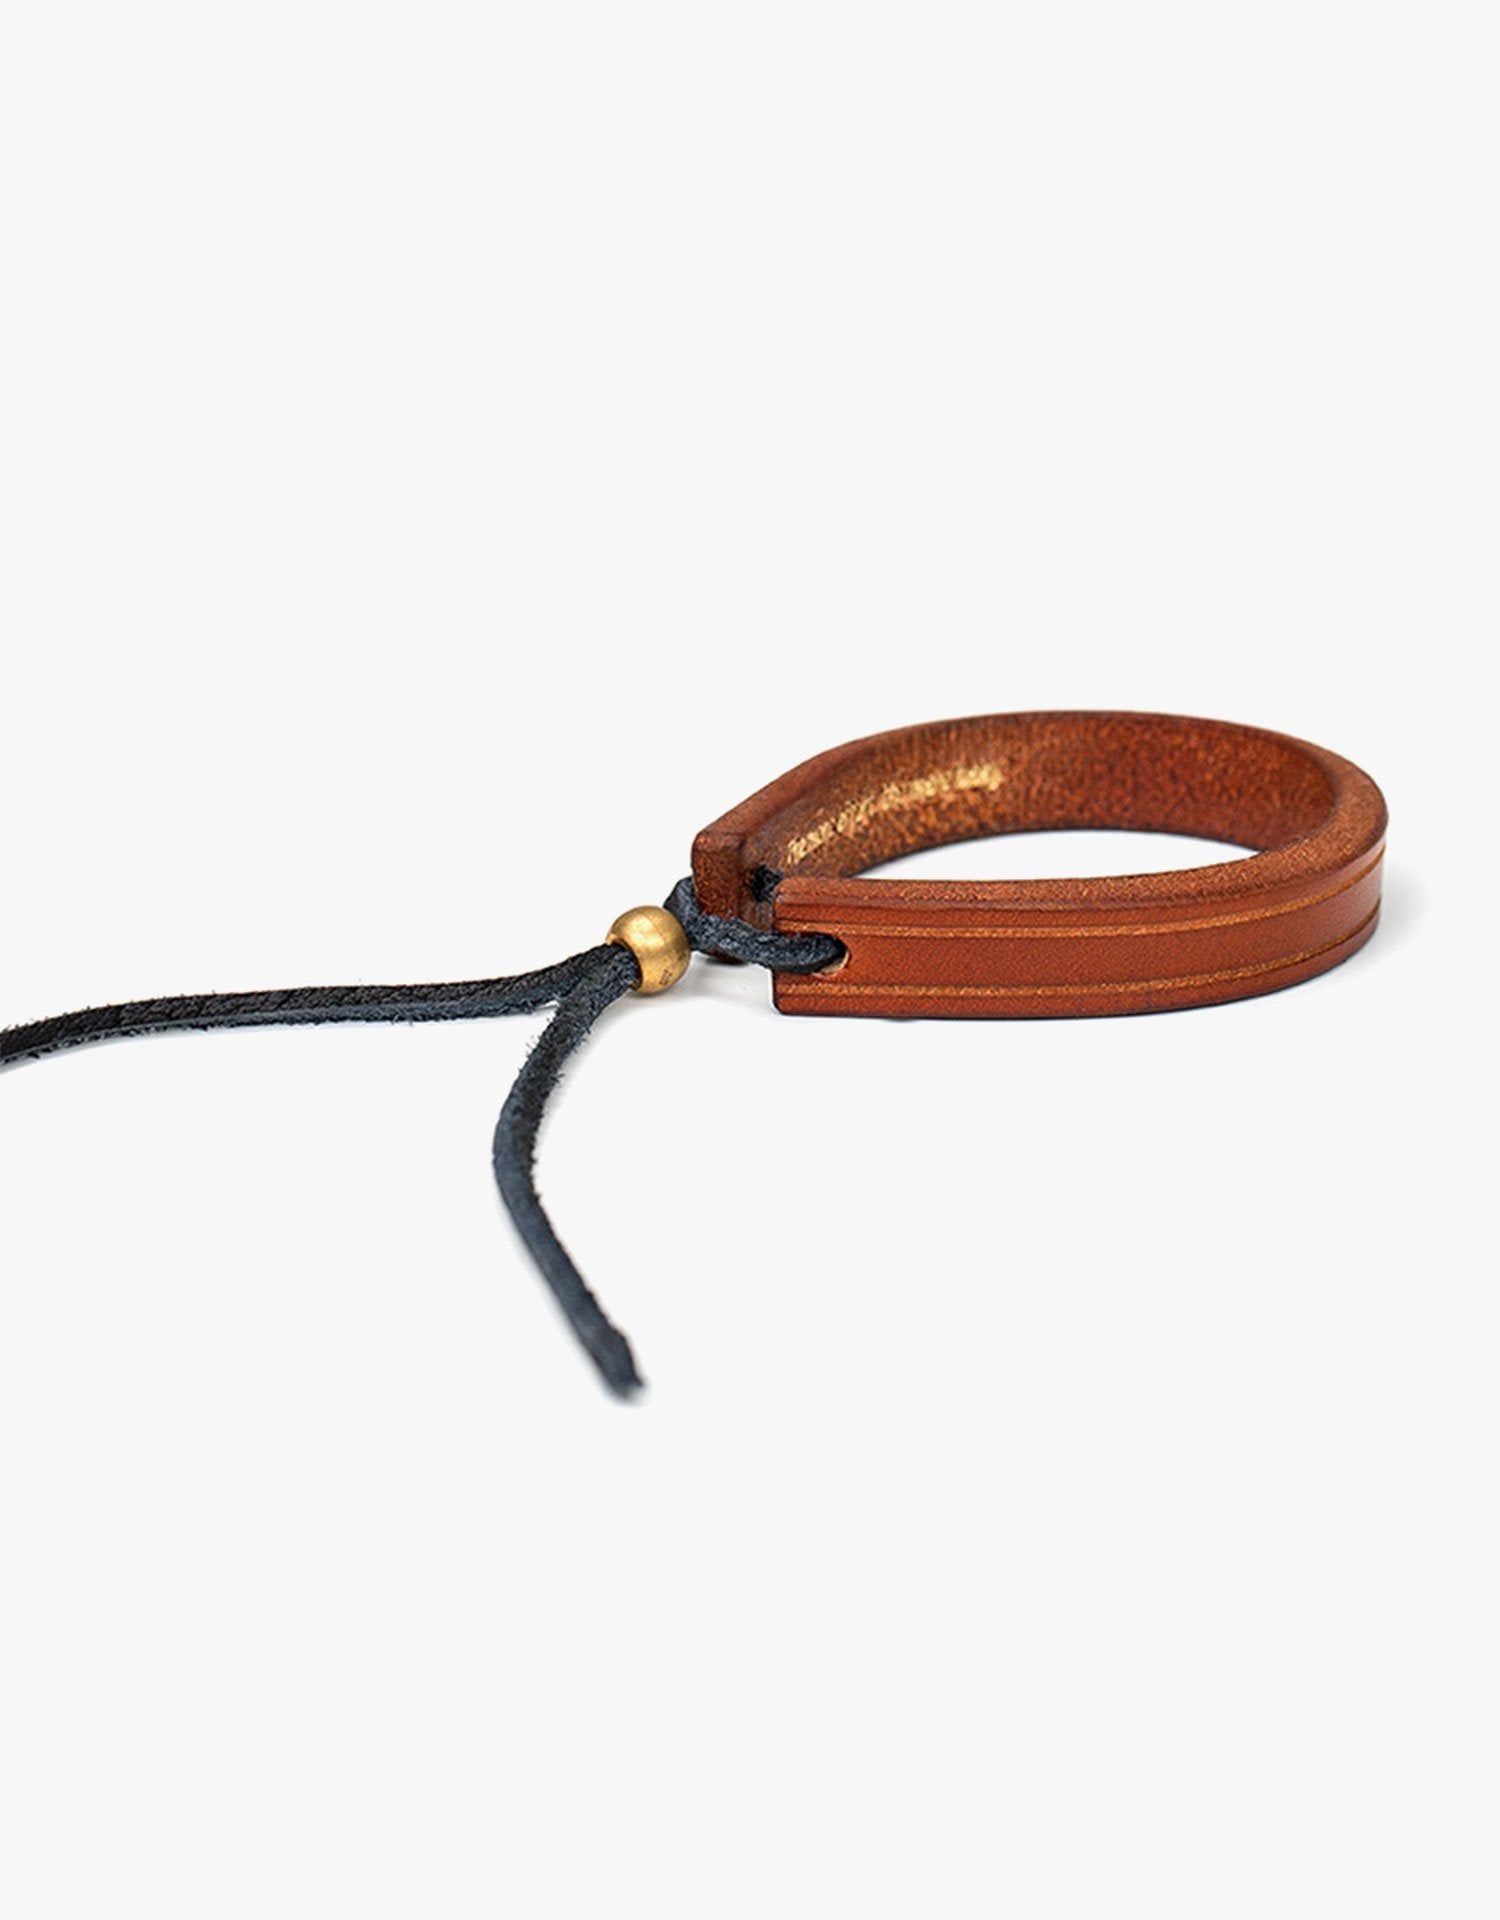 Selected Leather Bracelet